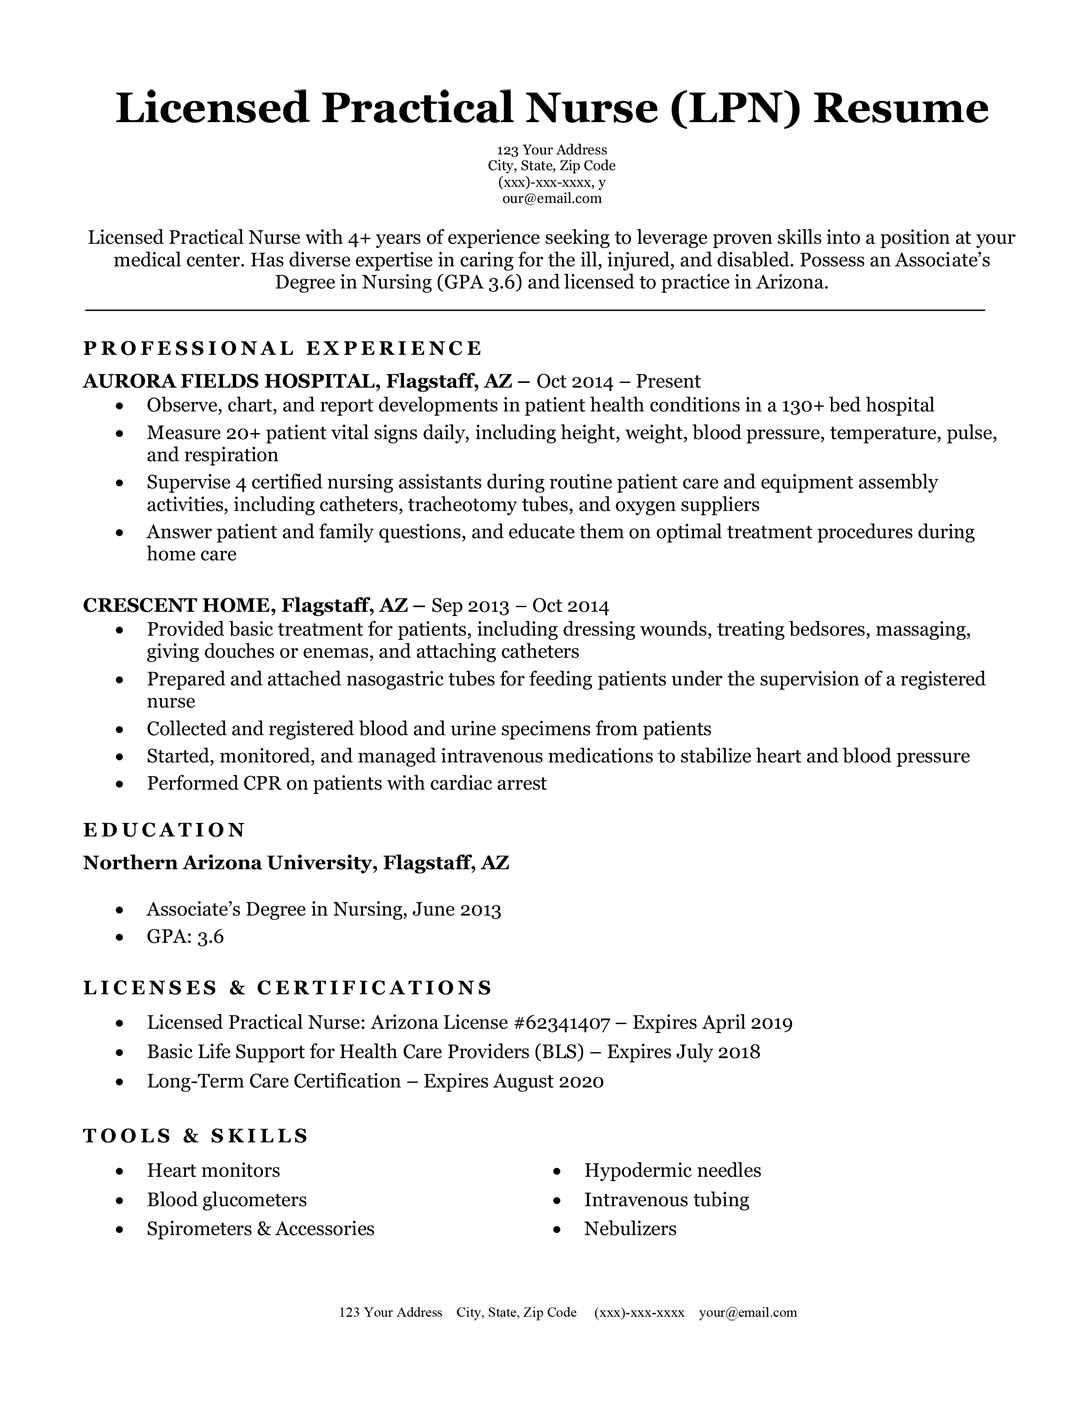 Federal Resume Template 2018 from resumecompanion.com